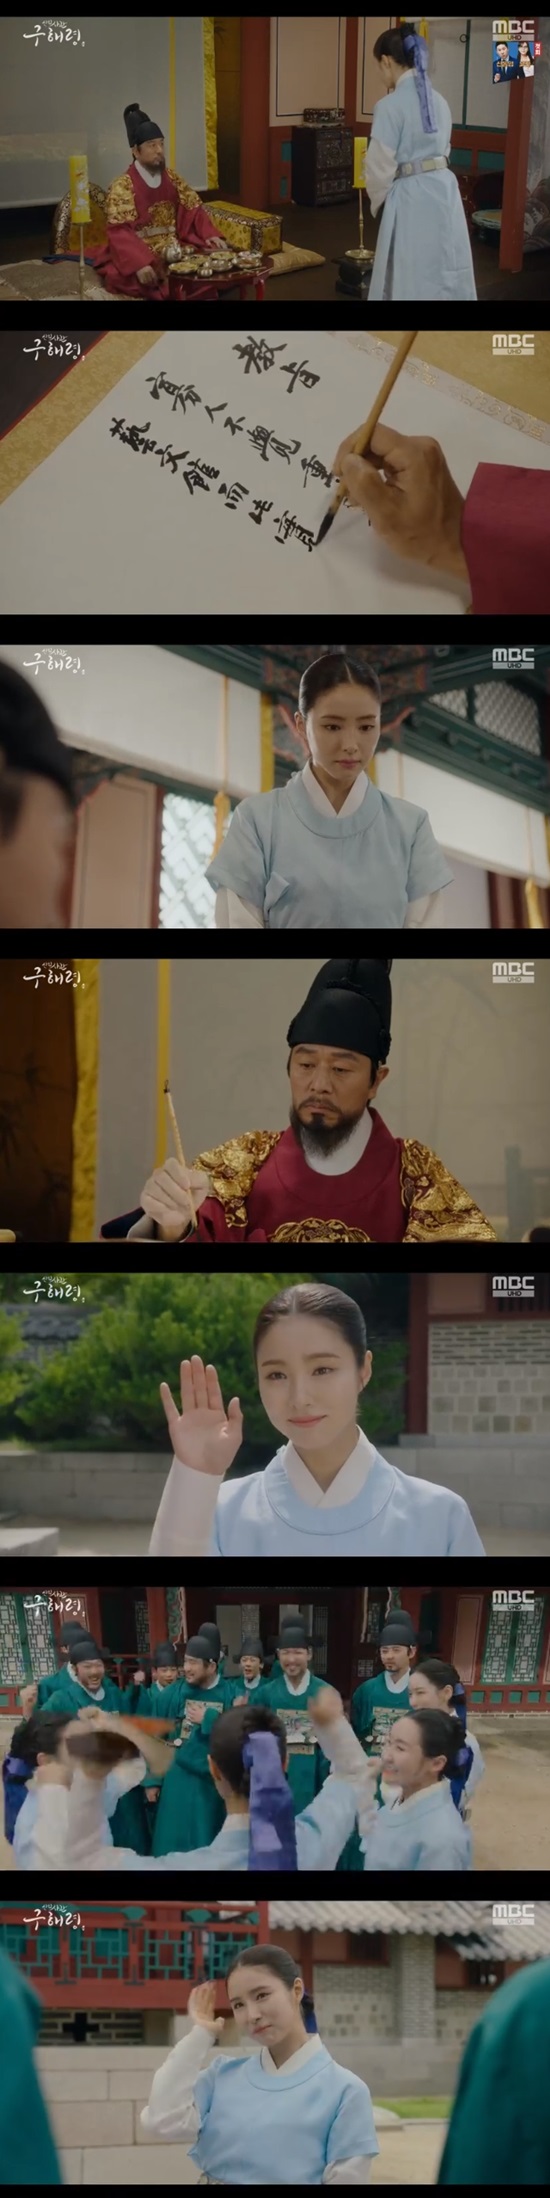 The officer Shin Se-kyung made a conversation with the king and revealed the appearance of the woman.On August 22, MBC drama Rookie Historian Goo Hae-ryung (played by Kim Ho-soo/directed by Kang Il-soo Han Hyun-hee) was broadcast on August 22nd, and King (Kim Min-Sang) harassed the first lady Rookie Historian Goo Hae-ryung (Shin Se-kyung) in earnest ...Earlier, Rookie Historian Goo Hae-ryung overheard the King and Min Ik-pyeong (Choi Deok-moon) talking about Dae-gun Irim (Cha Eun-woo), and the king demanded that Rookie Historian Goo Hae-ryung show the talk by wondering if he had written it on the quadruple.Rookie Historian Goo Hae-ryung did not disclose the cadastral code as the cadastral code, was trapped in the oxa of the money department for violating the name of the cadastral code, and was released only after Min Woo-won (Lee Ji-hoon) and cadastral officers rebelled as a group.Min Woo-won rebelled against the king who was trying to take the temple by using Seung-jung Won, and when the Sungkyunkwan larvae and the officers joined, the king stepped back and released Rookie Historian Goo Hae-ryung.But from the dawn of the next day, Rookie Historian Goo Hae-ryung had to write down every move of the entrance examination king according to the name.The king decided to go and started to harass Rookie Historian Goo Hae-ryung.Min Woo-won told Rookie Historian Goo Hae-ryung, Im sorry, I have to go through this trouble.I understand if I want to step down from here, but Rookie Historian Goo Hae-ryung said, It was a real frog in my past life.Im sorry, but Im not sorry, its not the precepts that bother me, Im sure Im fit, hard, and Im not going to lose, he said.As Rookie Historian Goo Hae-ryung said, the king was tired before Rookie Historian Goo Hae-ryung, and the king said, I can not.I have to build a discussion now. But again, Rookie Historian Goo Hae-ryung said, Your Grace, I have a lot of alcohol, and its no use if youre going to get me drunk.To such Rookie Historian Goo Hae-ryung, the king offered to do anything if he could erase the days foregrounds.Rookie Historian Goo Hae-ryung said, I cant erase the beginning of the day. I didnt write anything. I didnt hear anything.I did not show it as a private matter even if it was empty. The great officer was not afraid of the king, and the good king was afraid of the officer.He was afraid of a lady without a dignity, he tried to turn my mind to Talk without being afraid of power or position,I will write down the good figure in the same way. Rookie Historian Goo Hae-ryung said, The officer is not the one who writes down the fault of the king.The reason I always want to be with you is not to monitor it, but to leave good words and actions in history and to act.I dare ask you, please dont stay away from the officer anymore. This is my only wish.Yoo Gyeong-sang